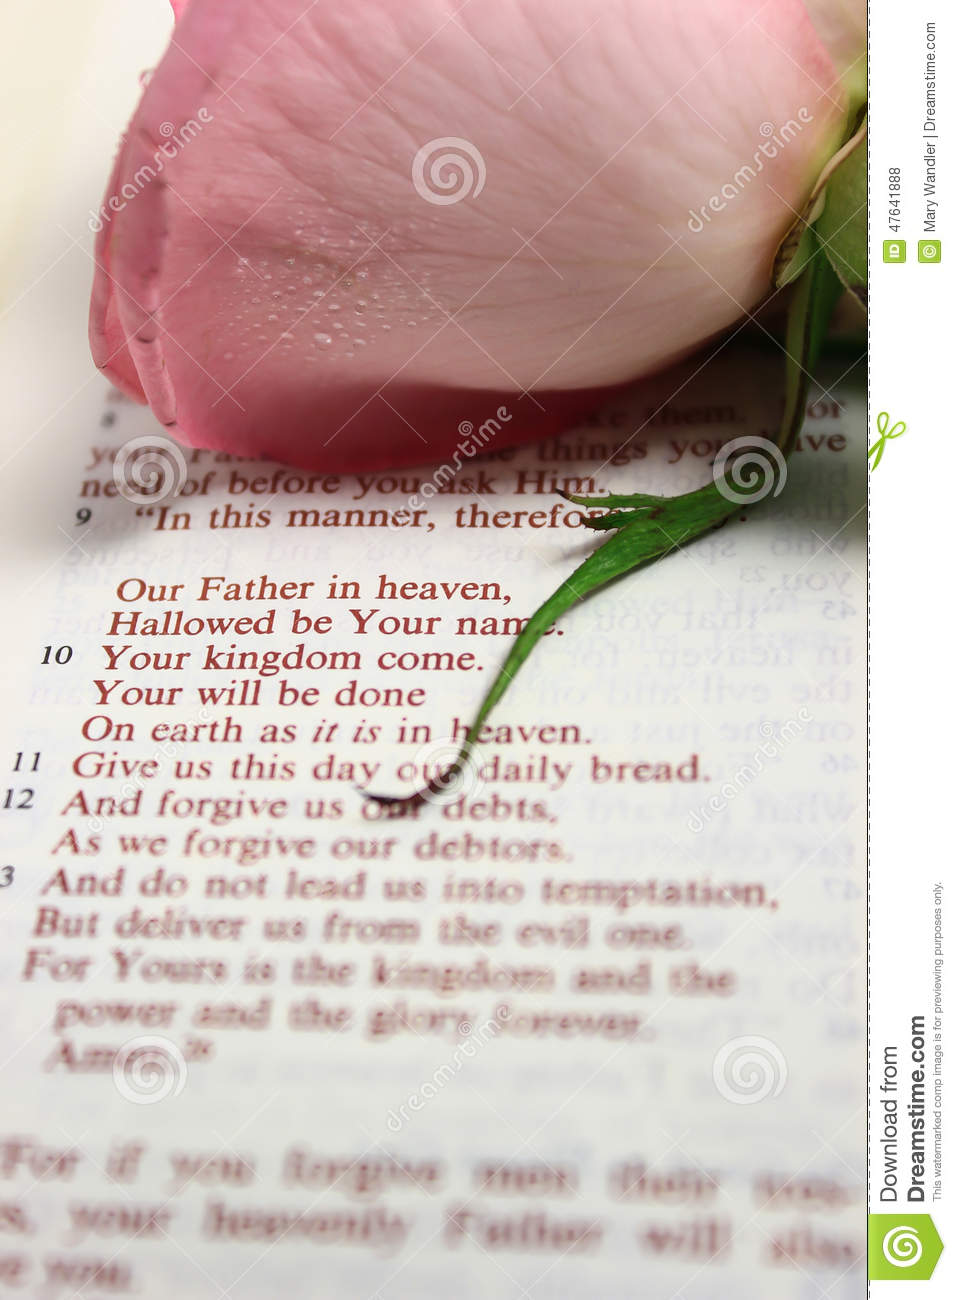 Bible Opened To The Lord S Prayer With A Pink Rose On The Page 